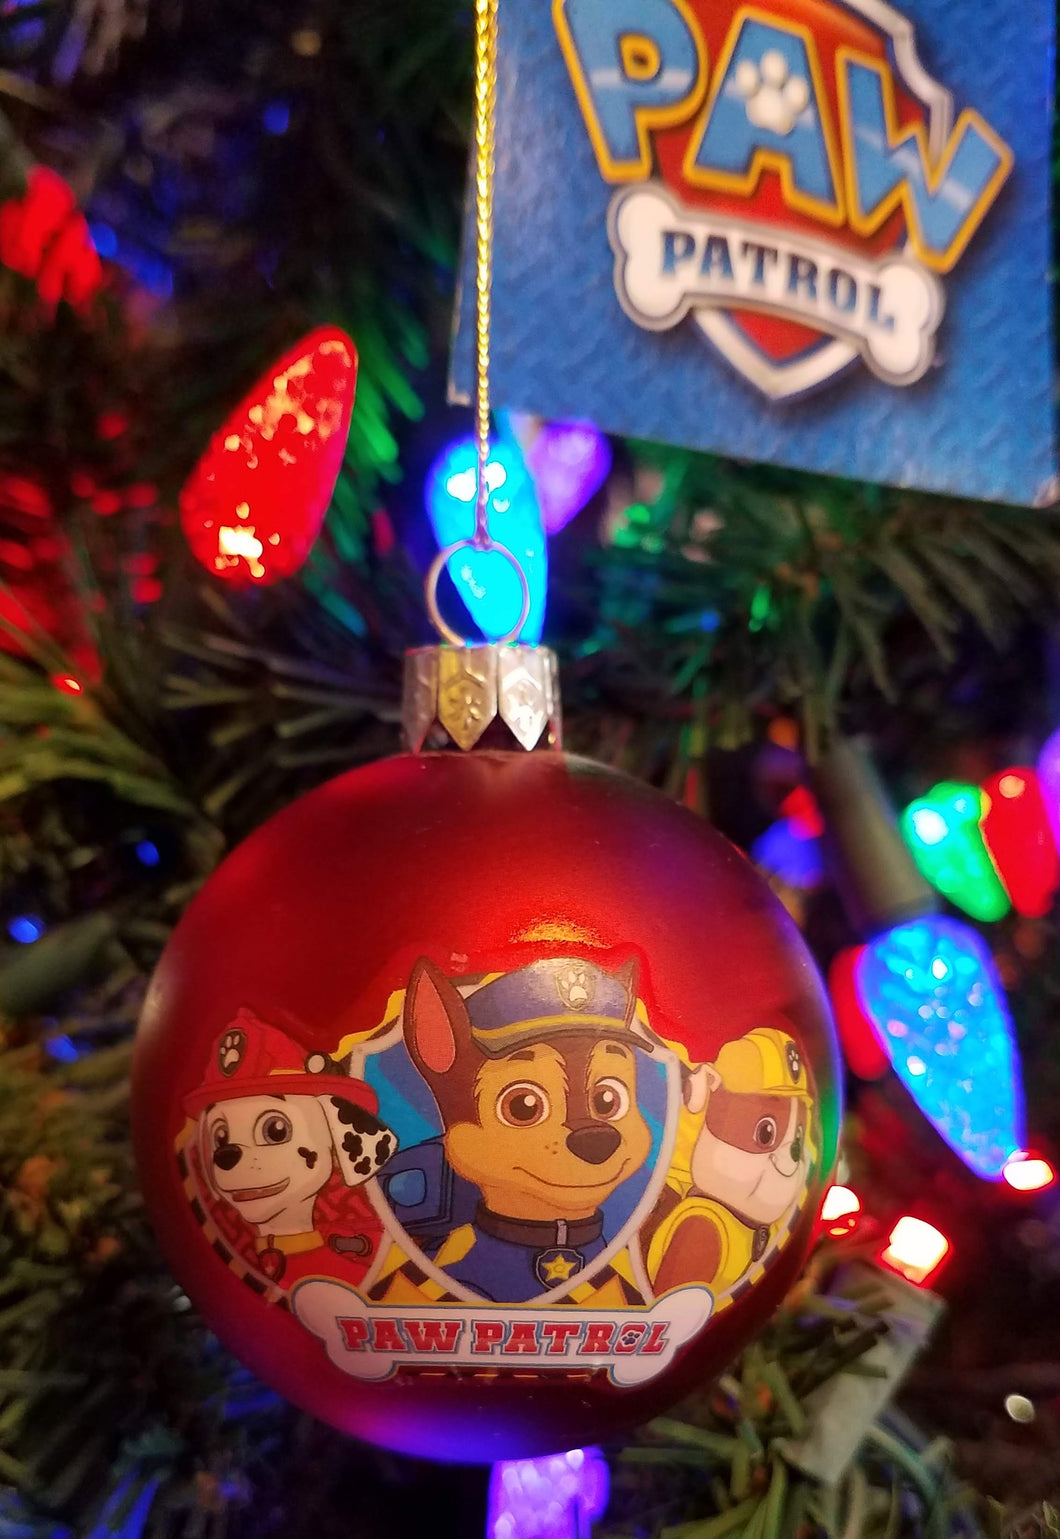 Red paw patrol ornament ready for action acrylic 2